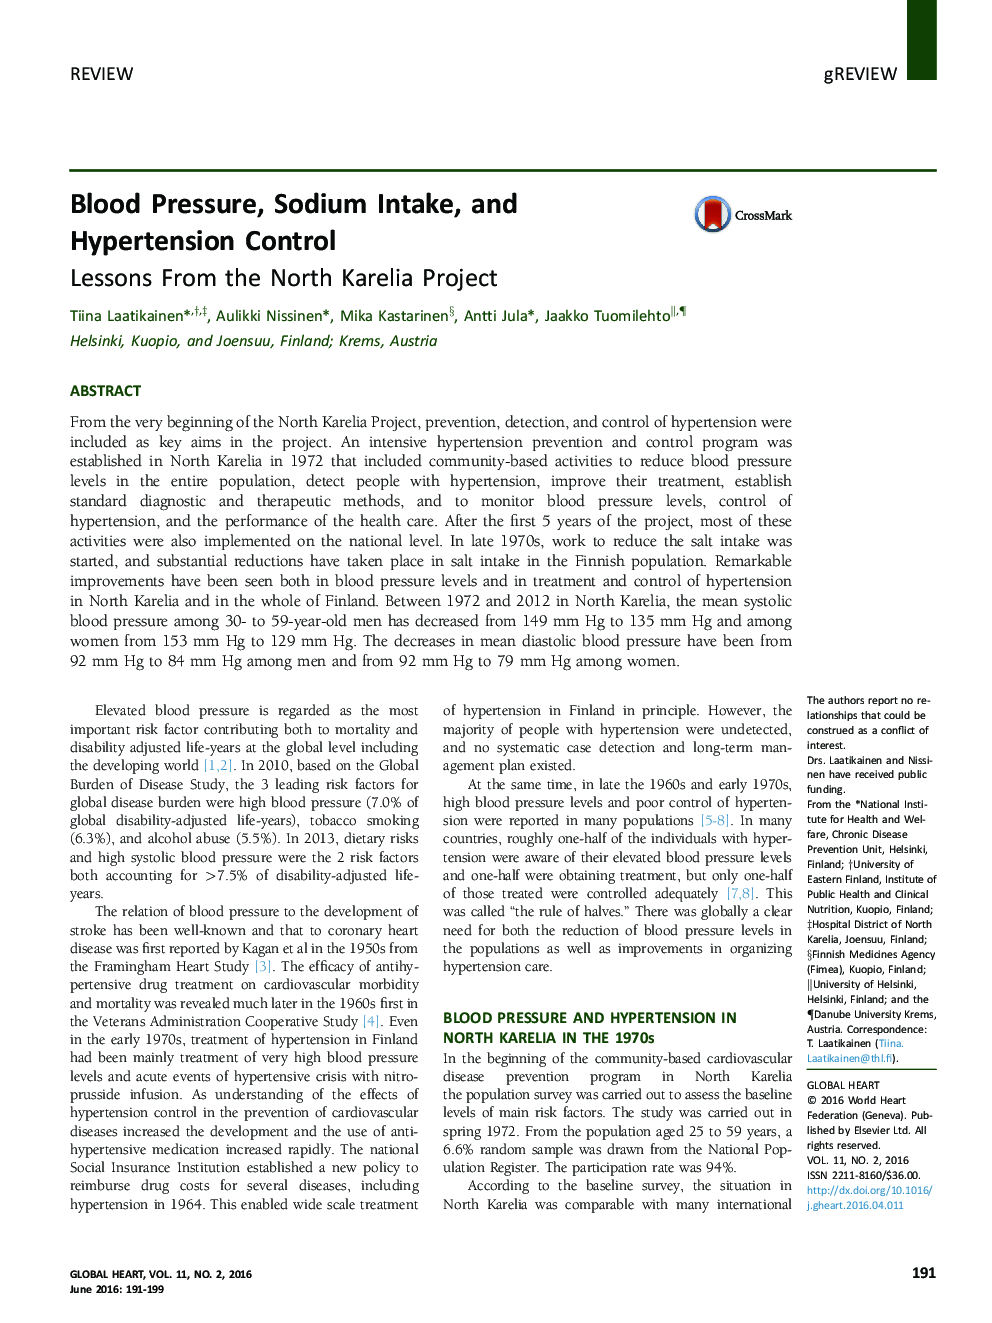 Blood Pressure, Sodium Intake, and Hypertension Control : Lessons From the North Karelia Project